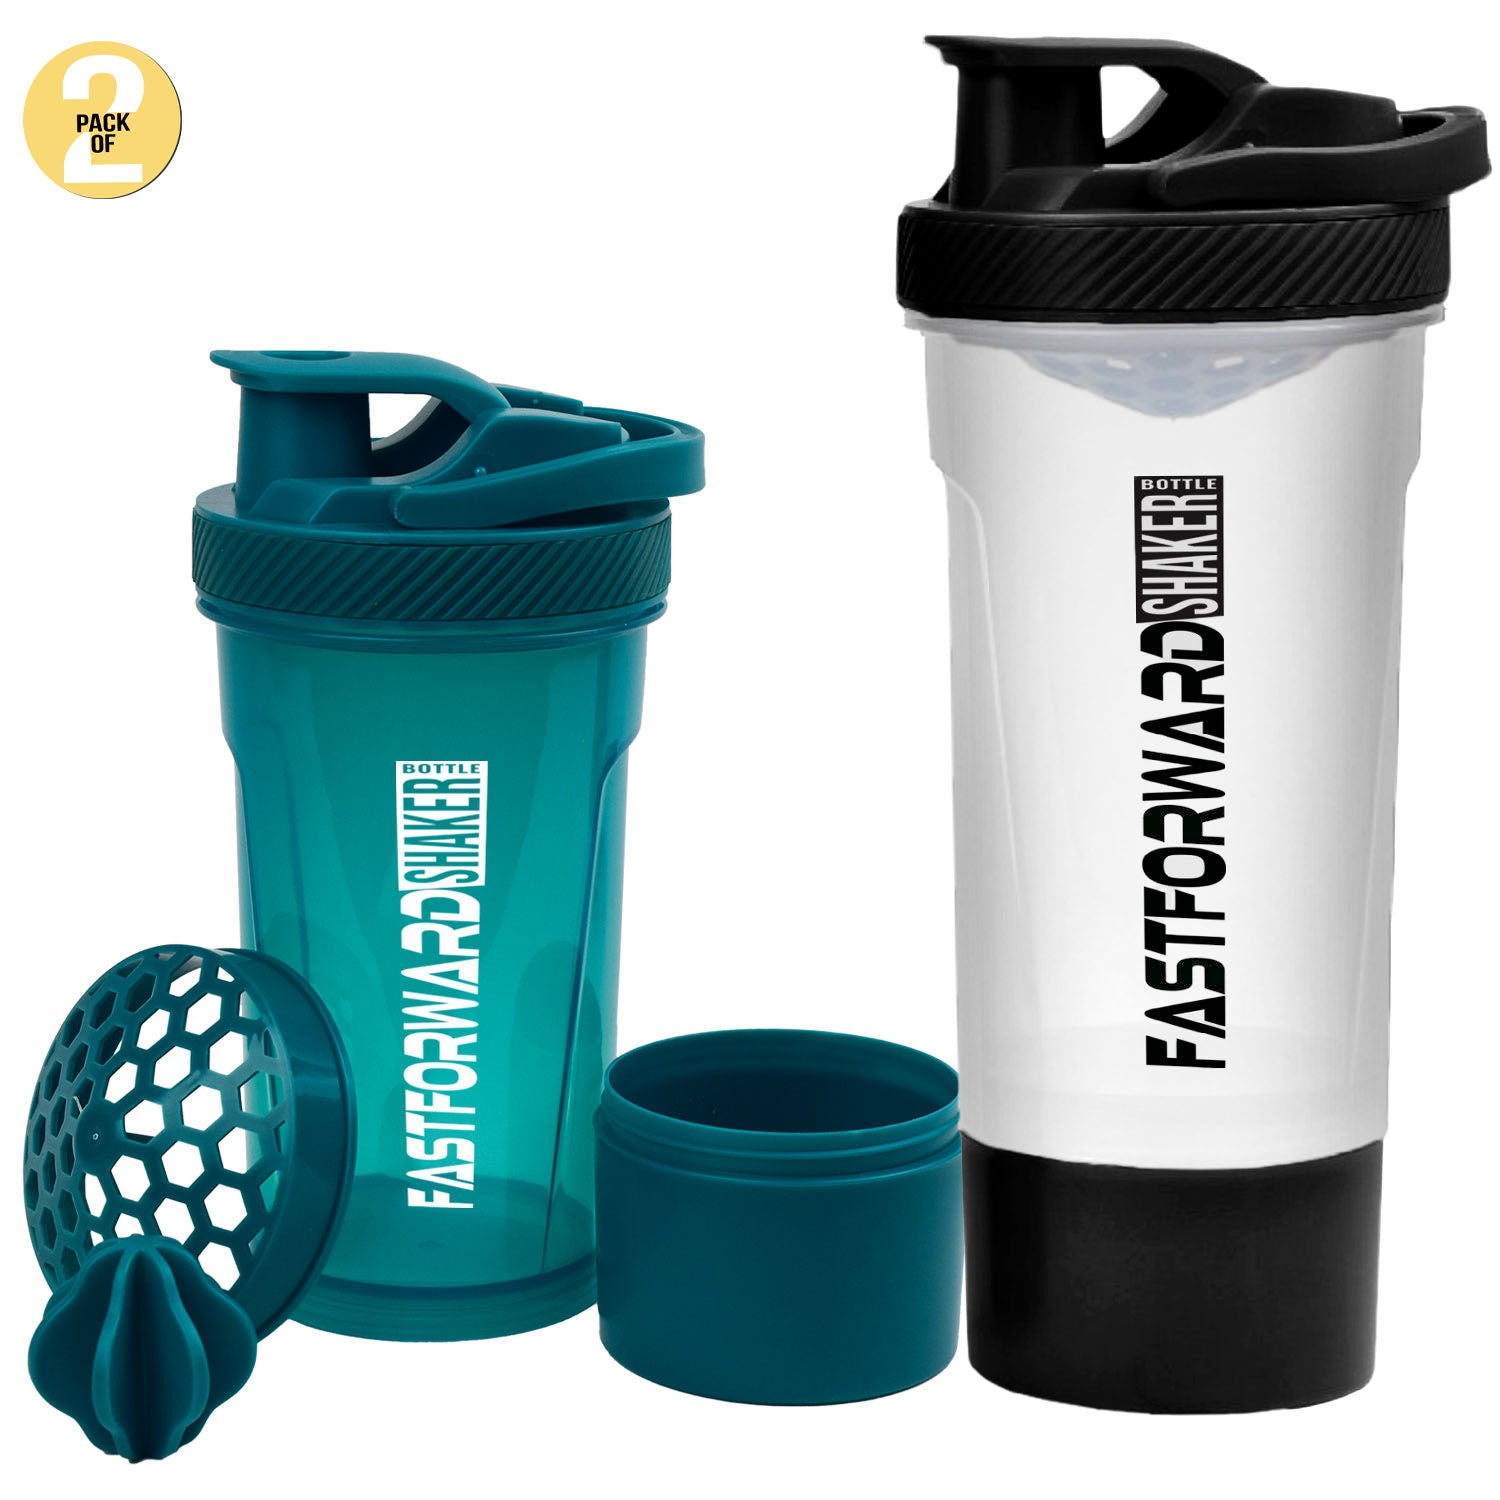 Fast Forward Shaker Bottle - 24 Ounce Protein Shaker Plastic Bottle for Pre & Post workout with Twist and Lock Protein Box Storage Pack of 2 Fast Forward